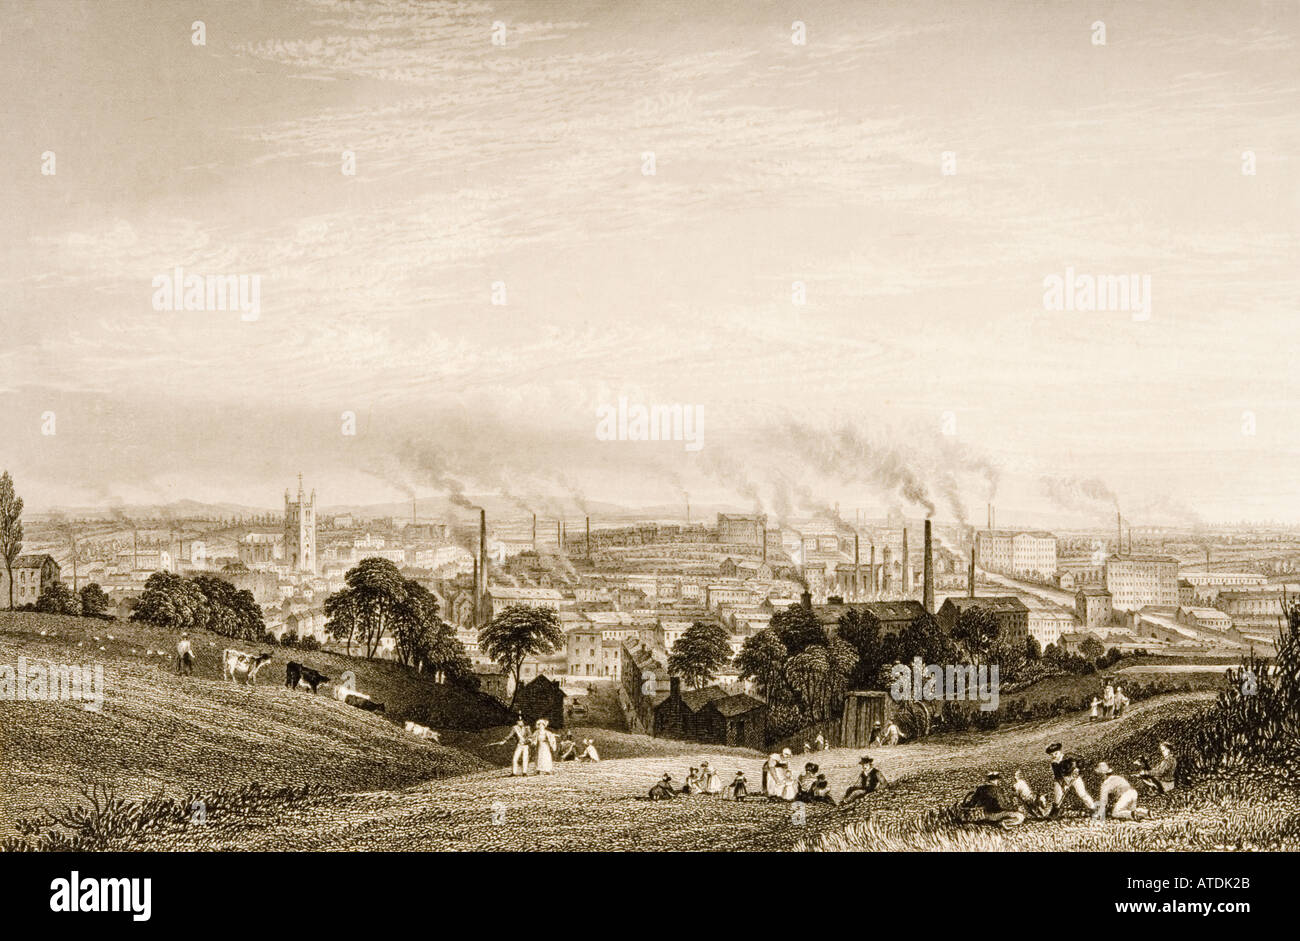 General view of Stockport, Lancashire, England in the 1830's showing cotton mills. Stock Photo